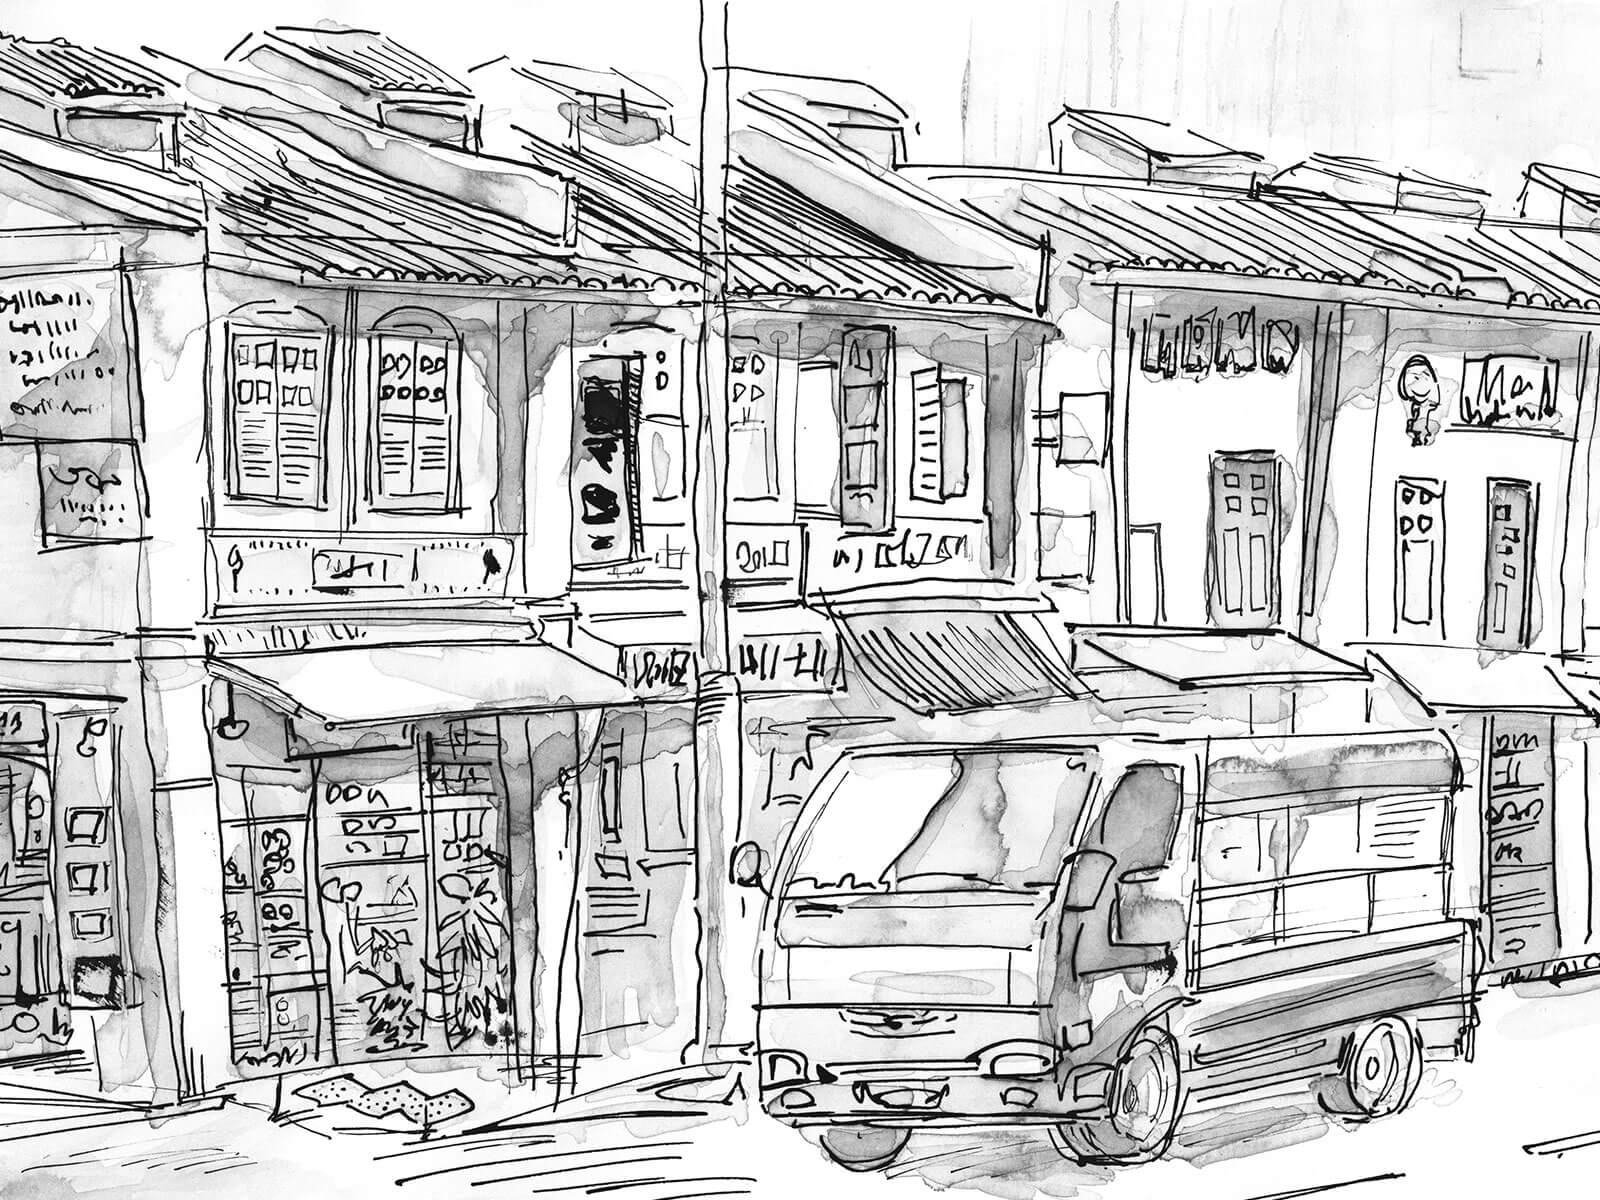 Black-and-white sketch of a van parked next to low-rise buildings.